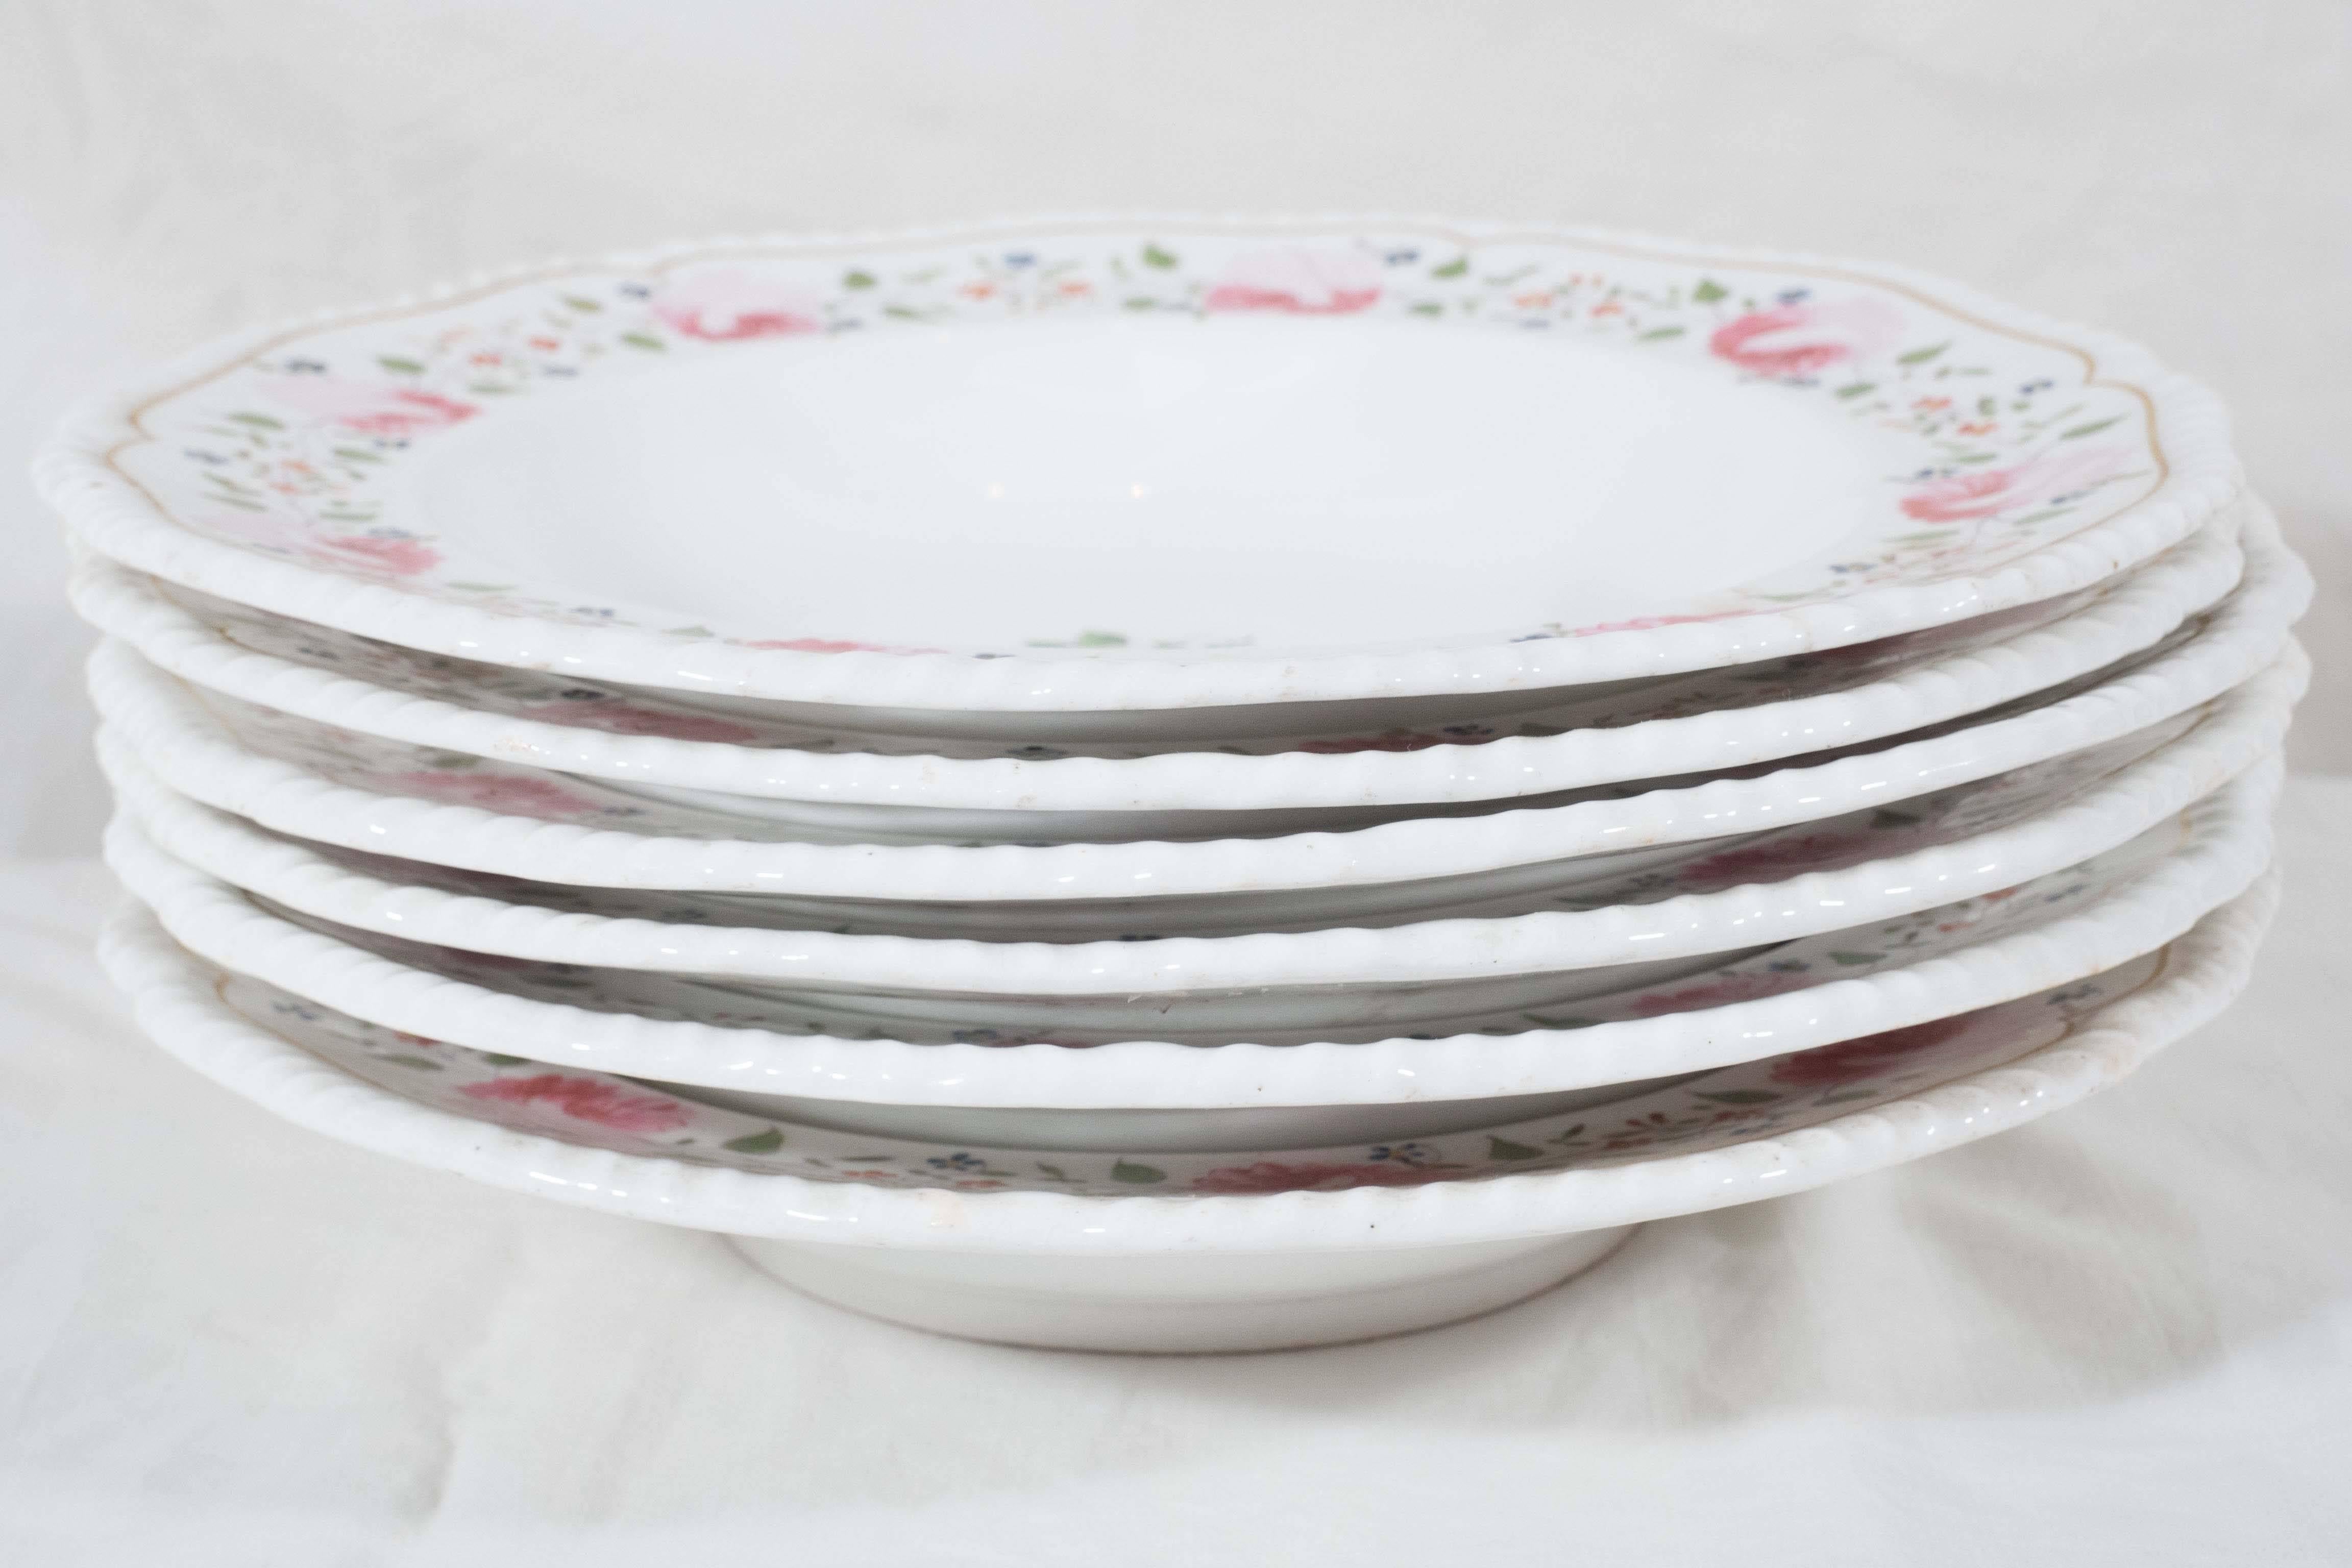 English Antique Staffordshire Soup Dishes Decorated with Pink Roses circa 1840